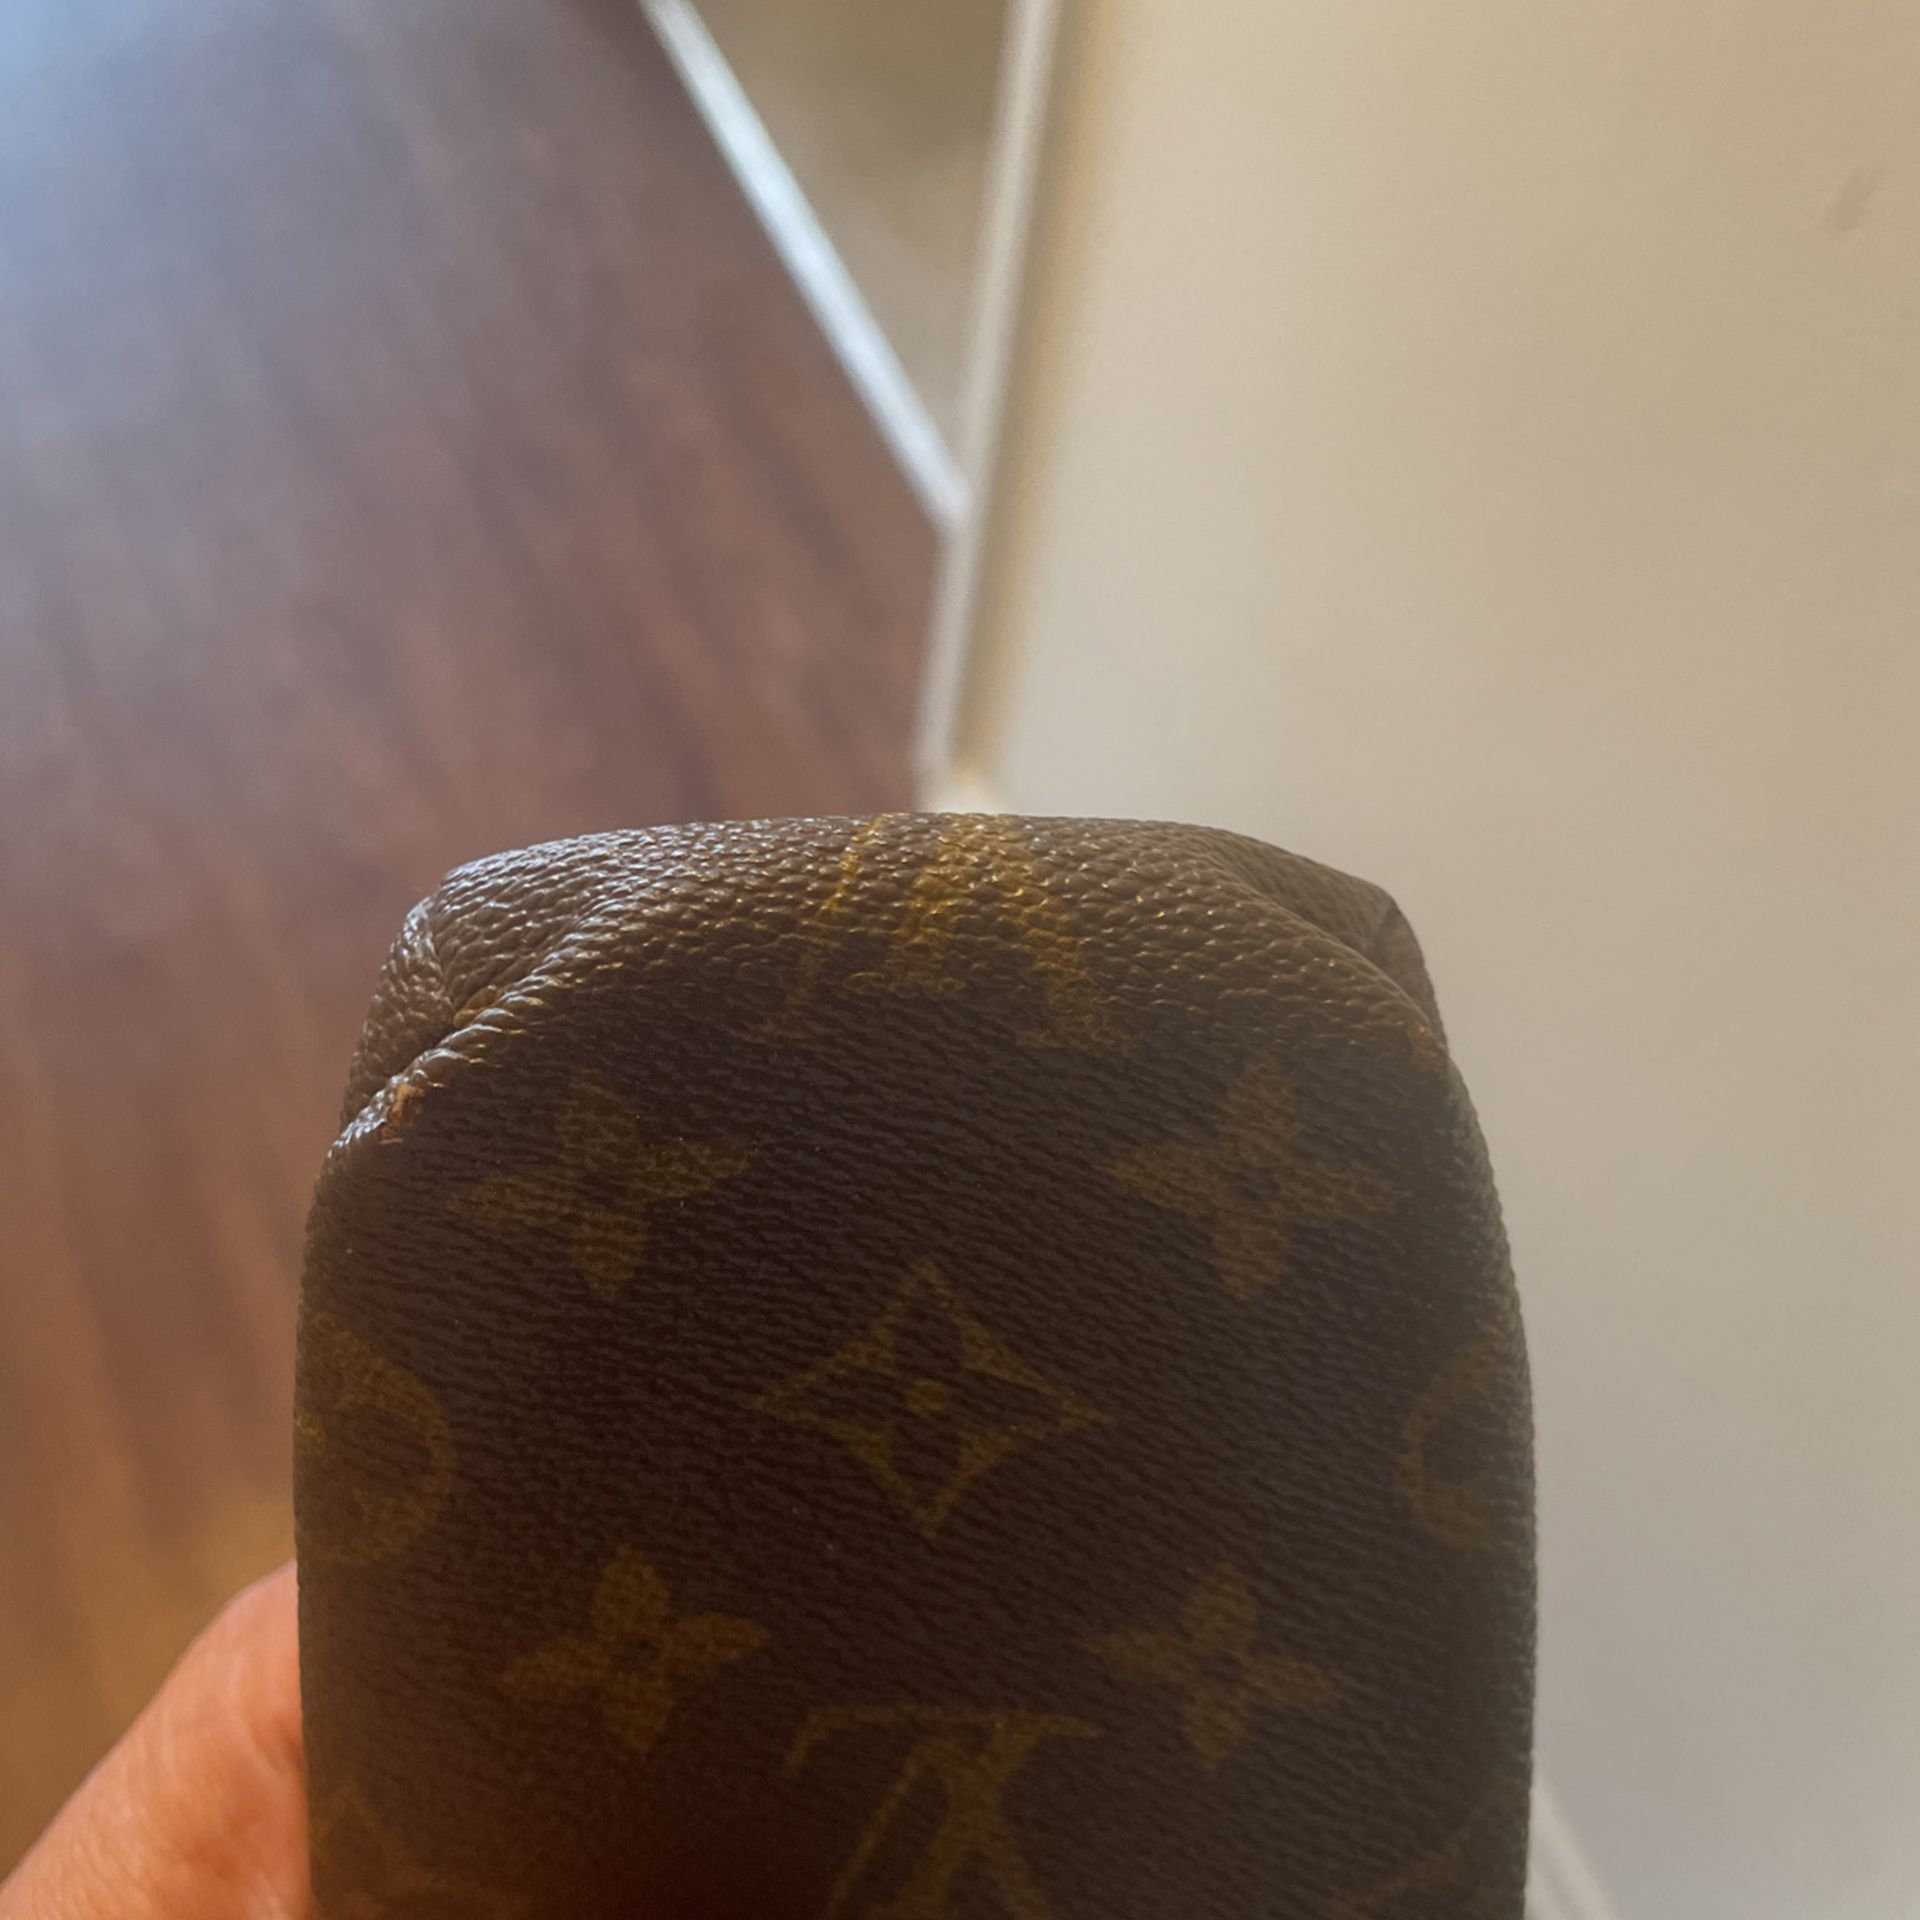 Louis Vuitton cigarettes and lighter case for Sale in Campbell, CA